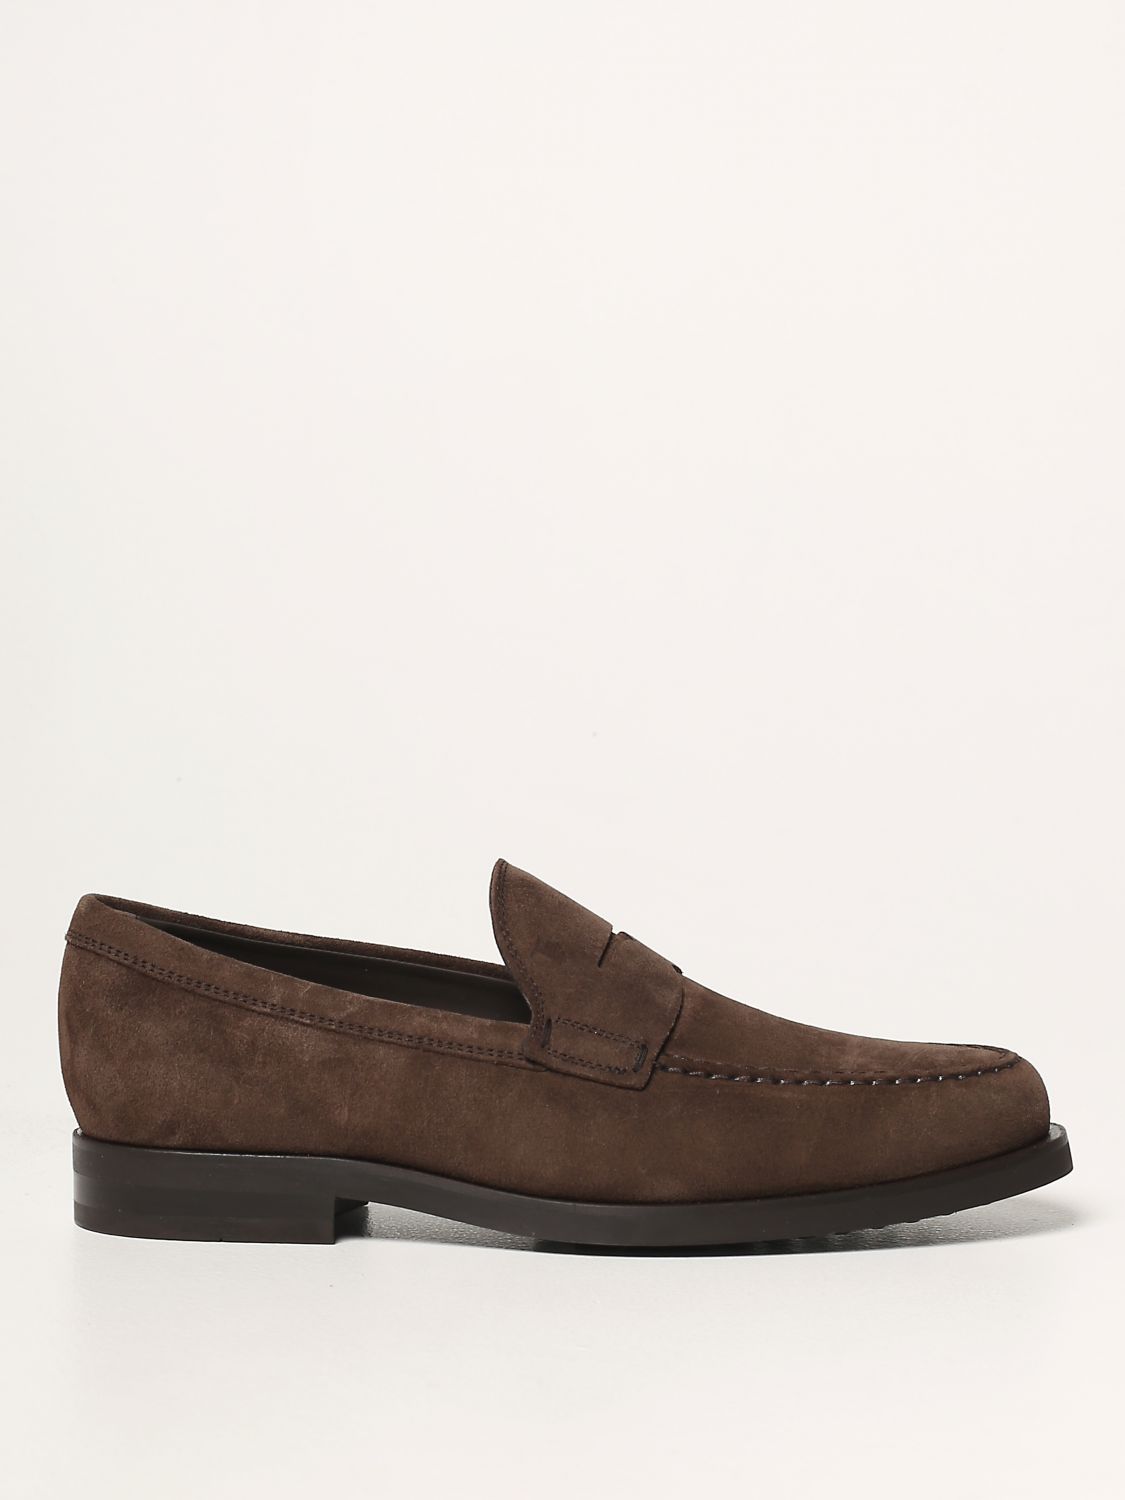 Mocassins Tod's: Chaussures homme Tod's brun 1